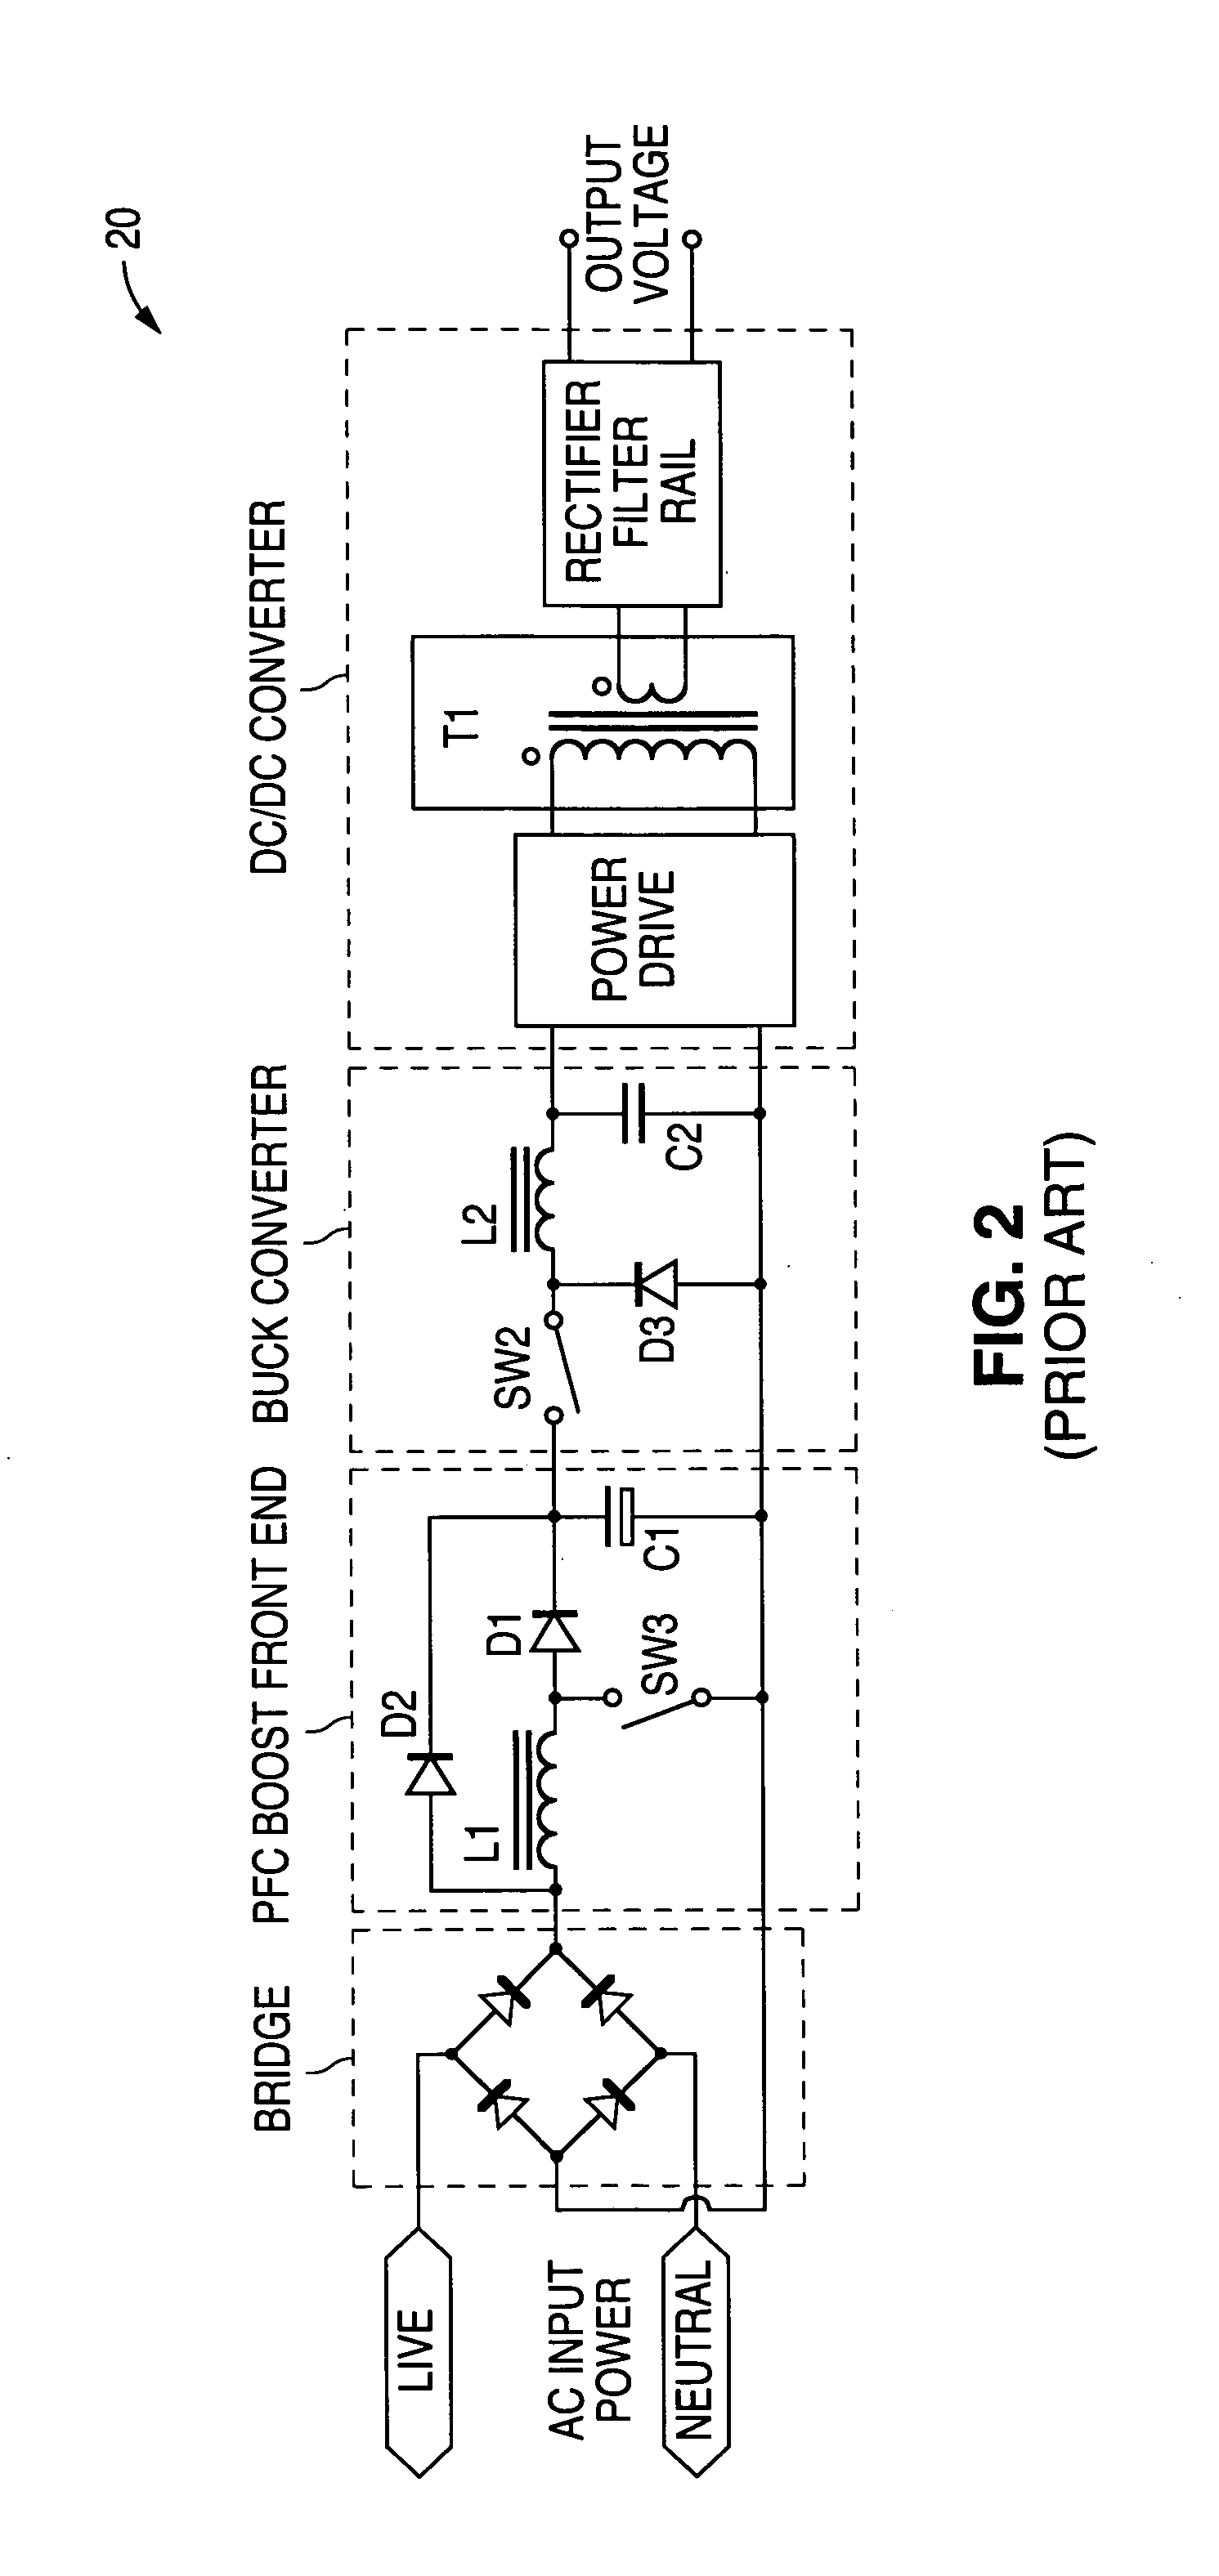 Circuit for maintaining hold-up time while reducing bulk capacitor size and improving efficiency in a power supply